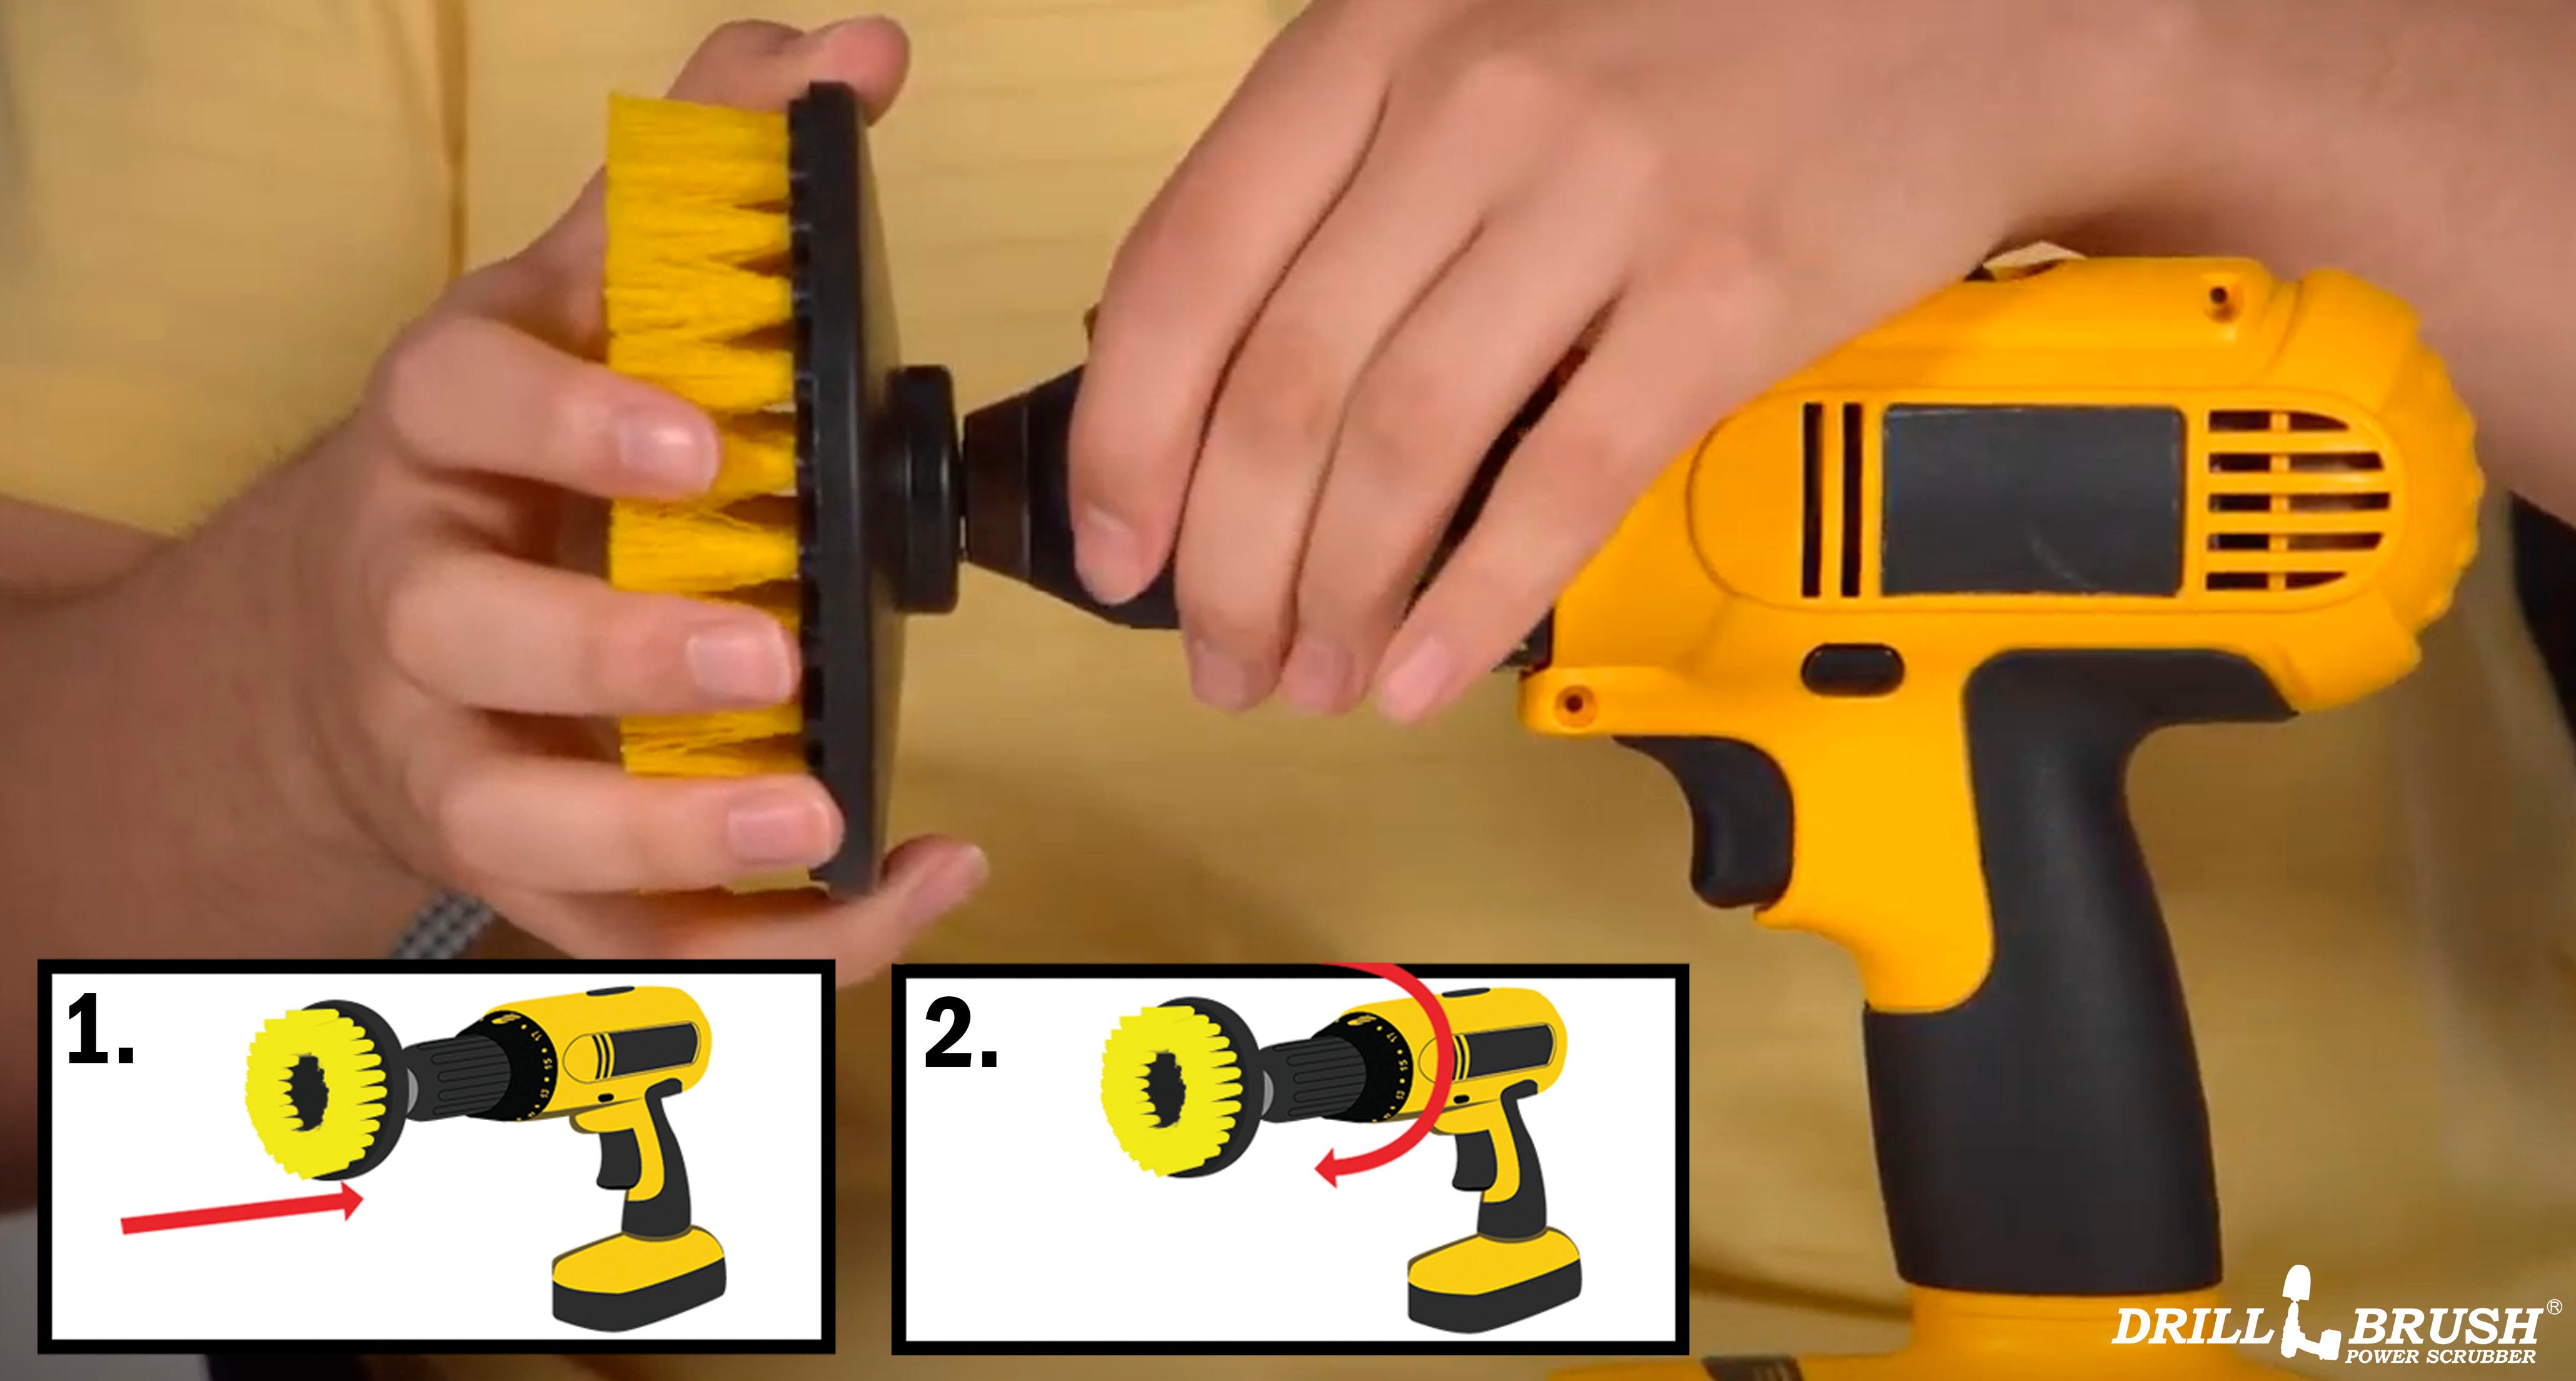 How to make a power scrubber with your cordless drill - CNET